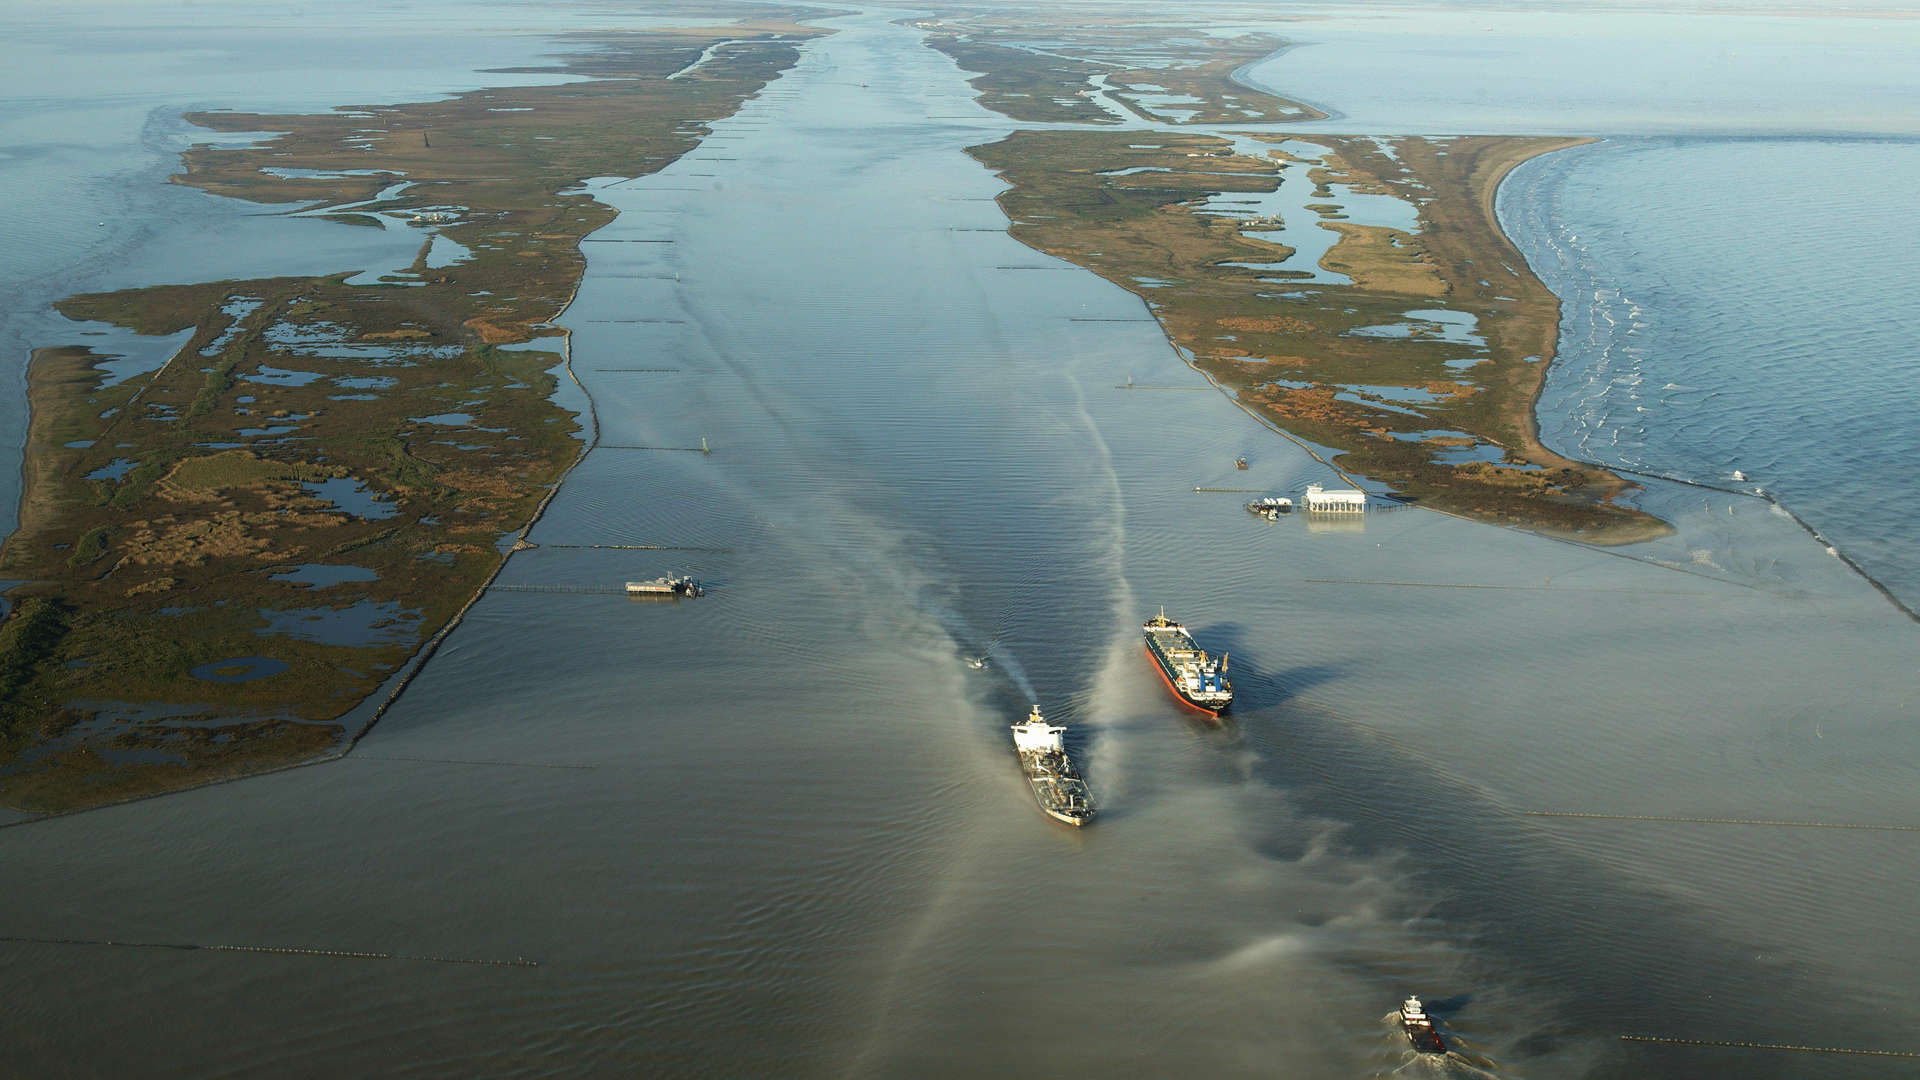 Aerial view of two large ships traveling on a drought-stricken Mississippi River. Photo: Philip Gould / Getty